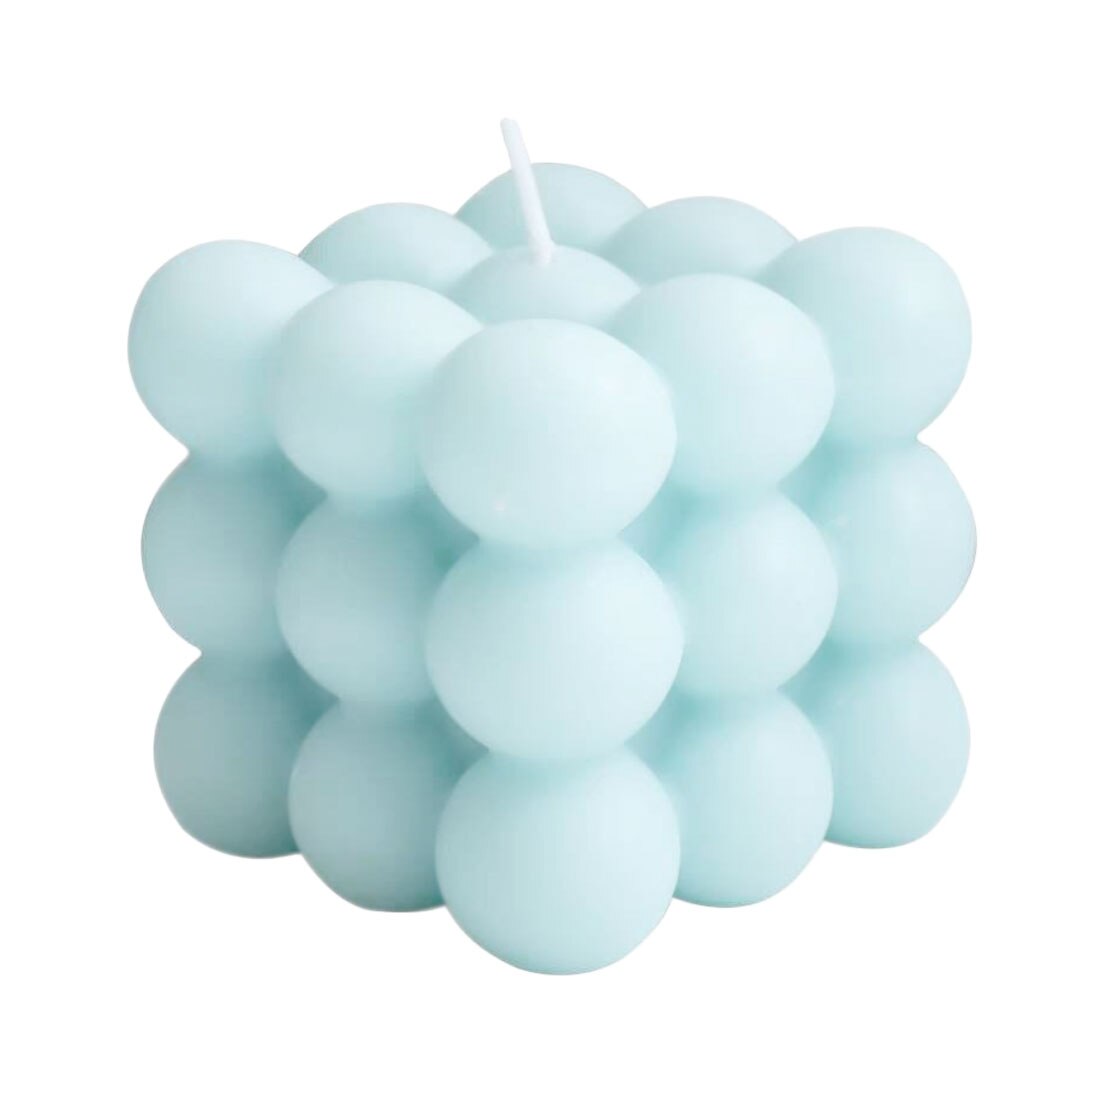 2.1Inch Round Magic Cube Candle scented relaxing Birthday 1PC Soy Wax Aromatherapy Candles Home Party Decoration: Blue cube